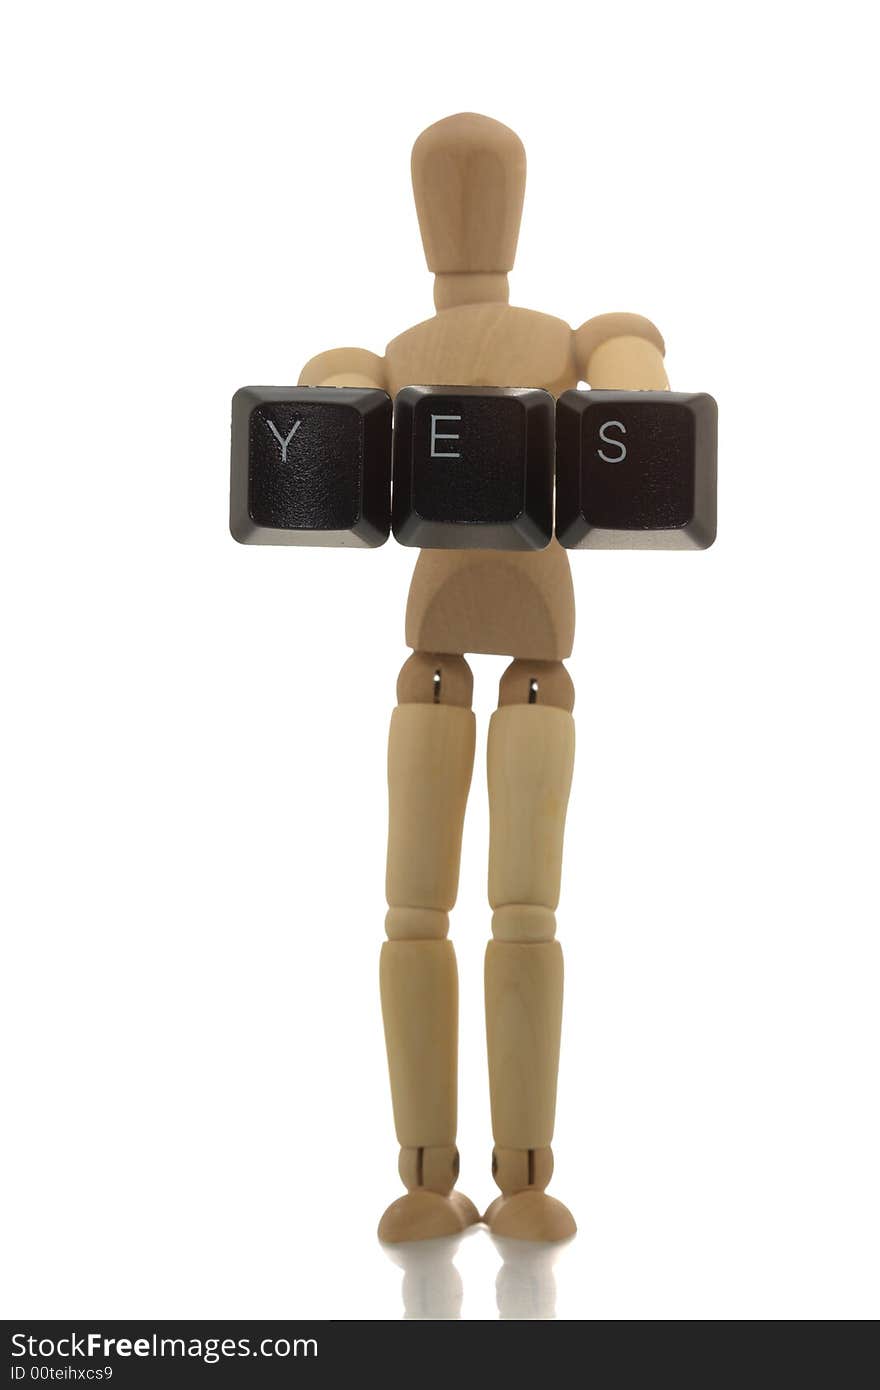 Manikin showing YES keys. Message concept.